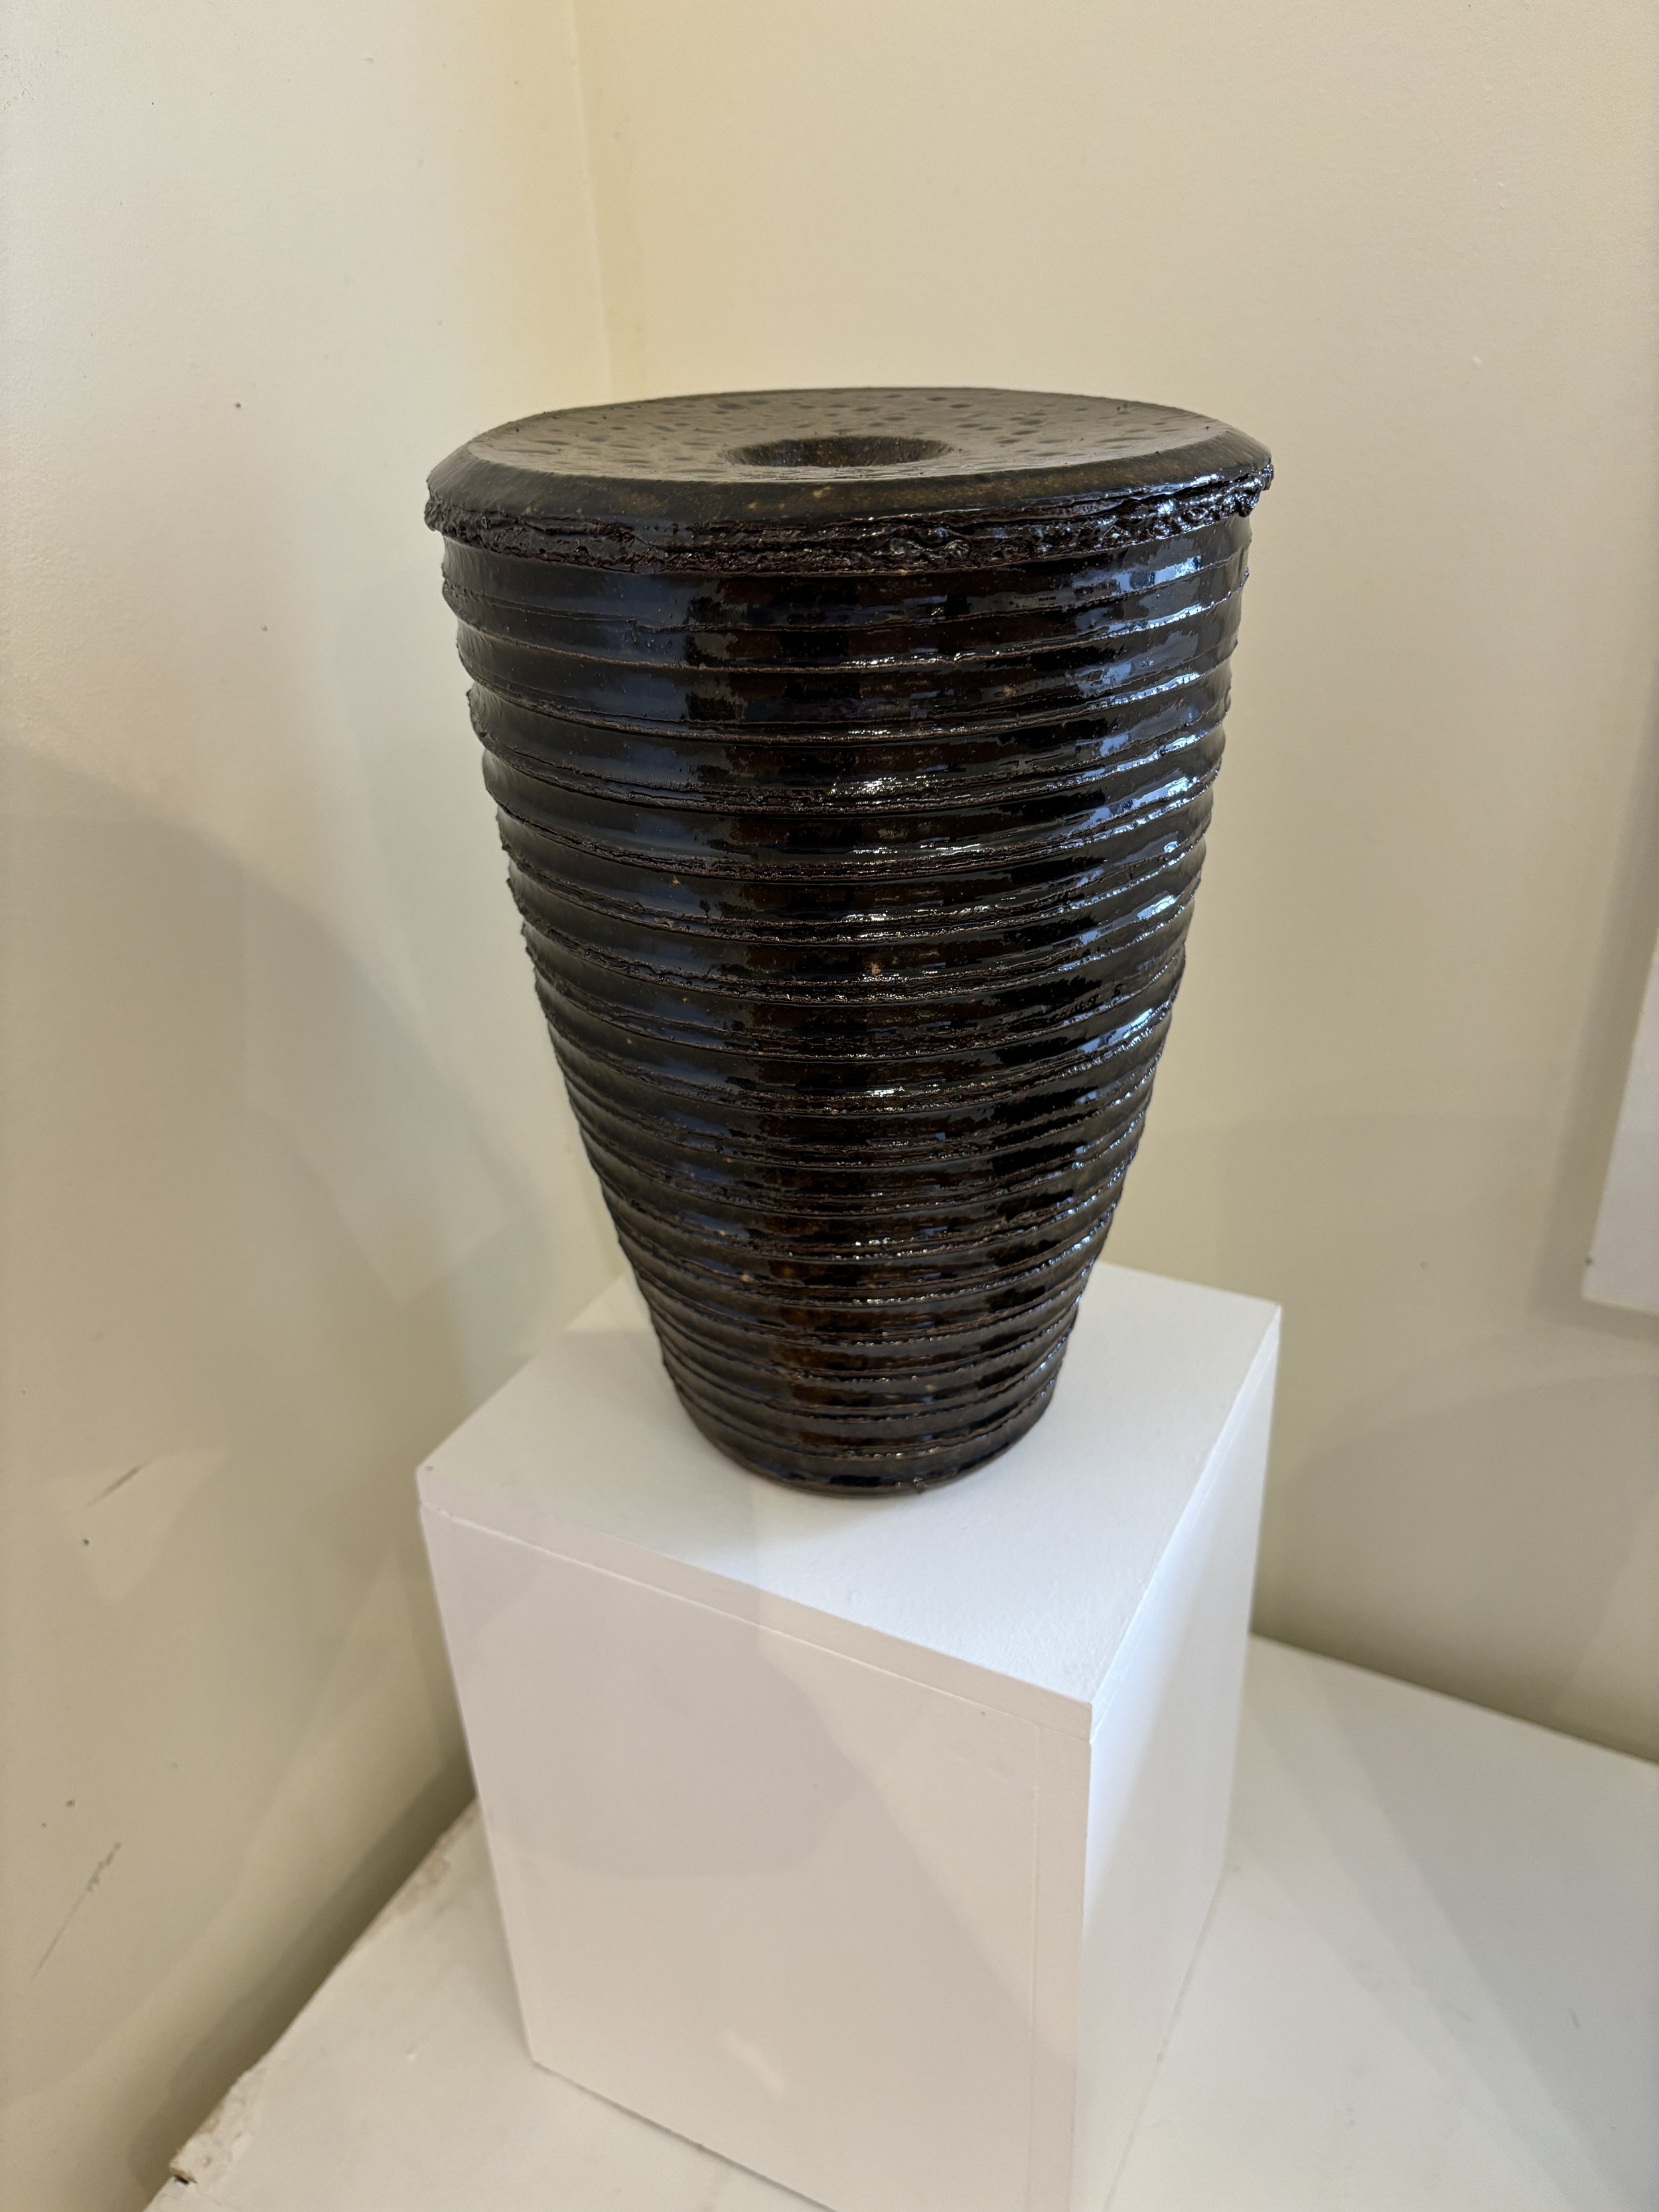 19. Low-Fired Urn (Small)